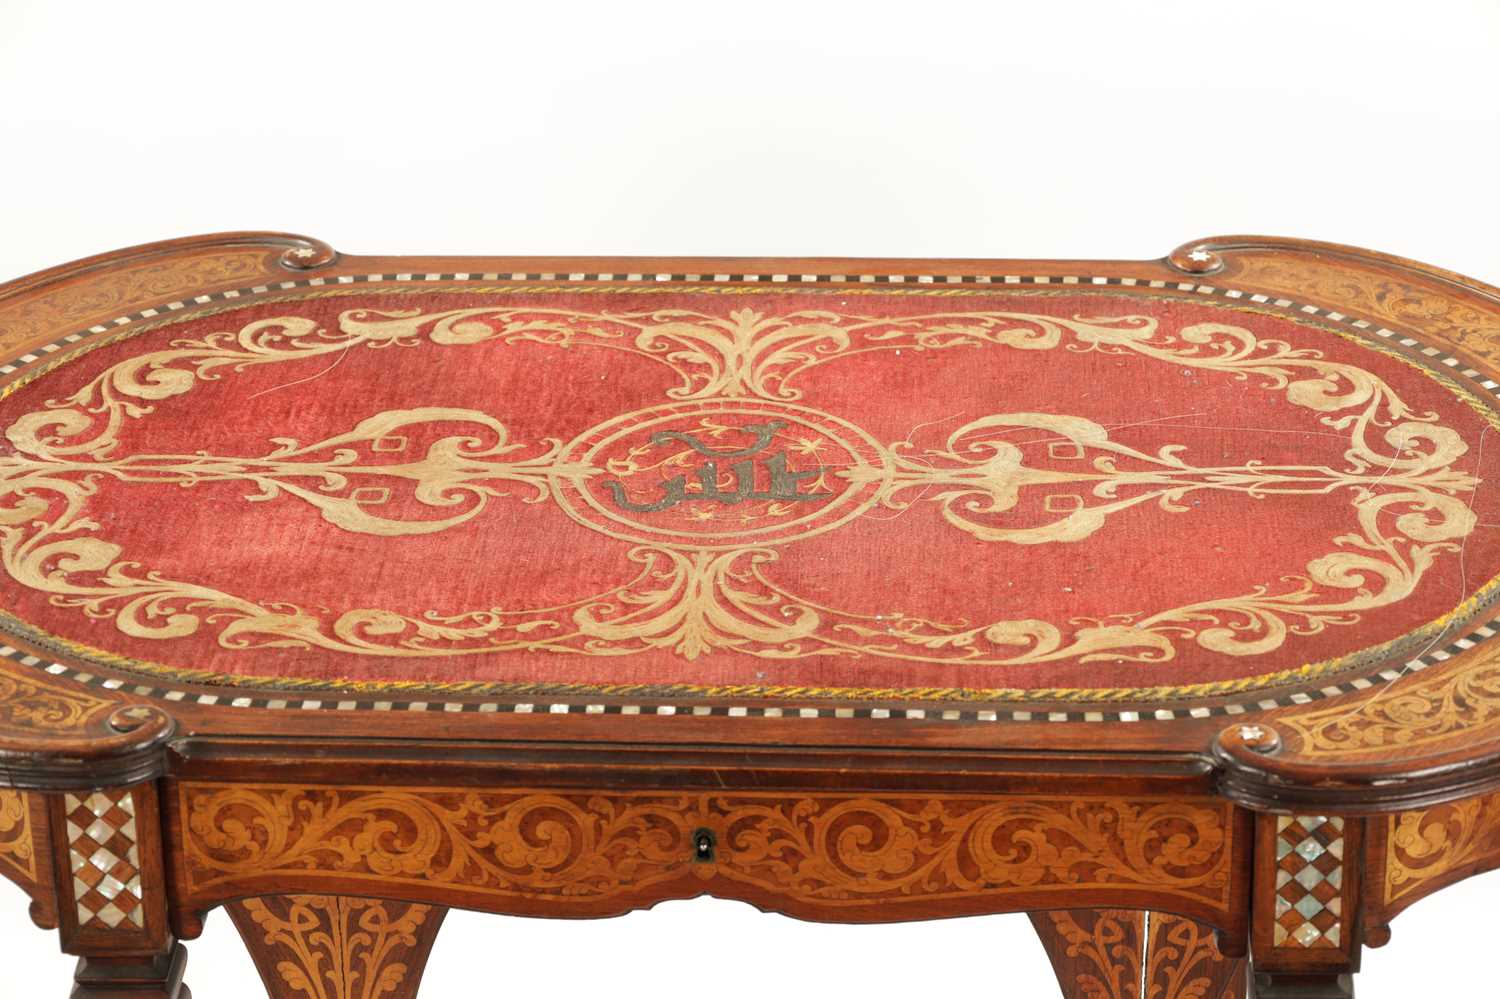 AN ART NOUVEAU OTTOMAN ISLAMIC STYLE WRITING TABLE AND TWO CHAIRS - Image 2 of 12